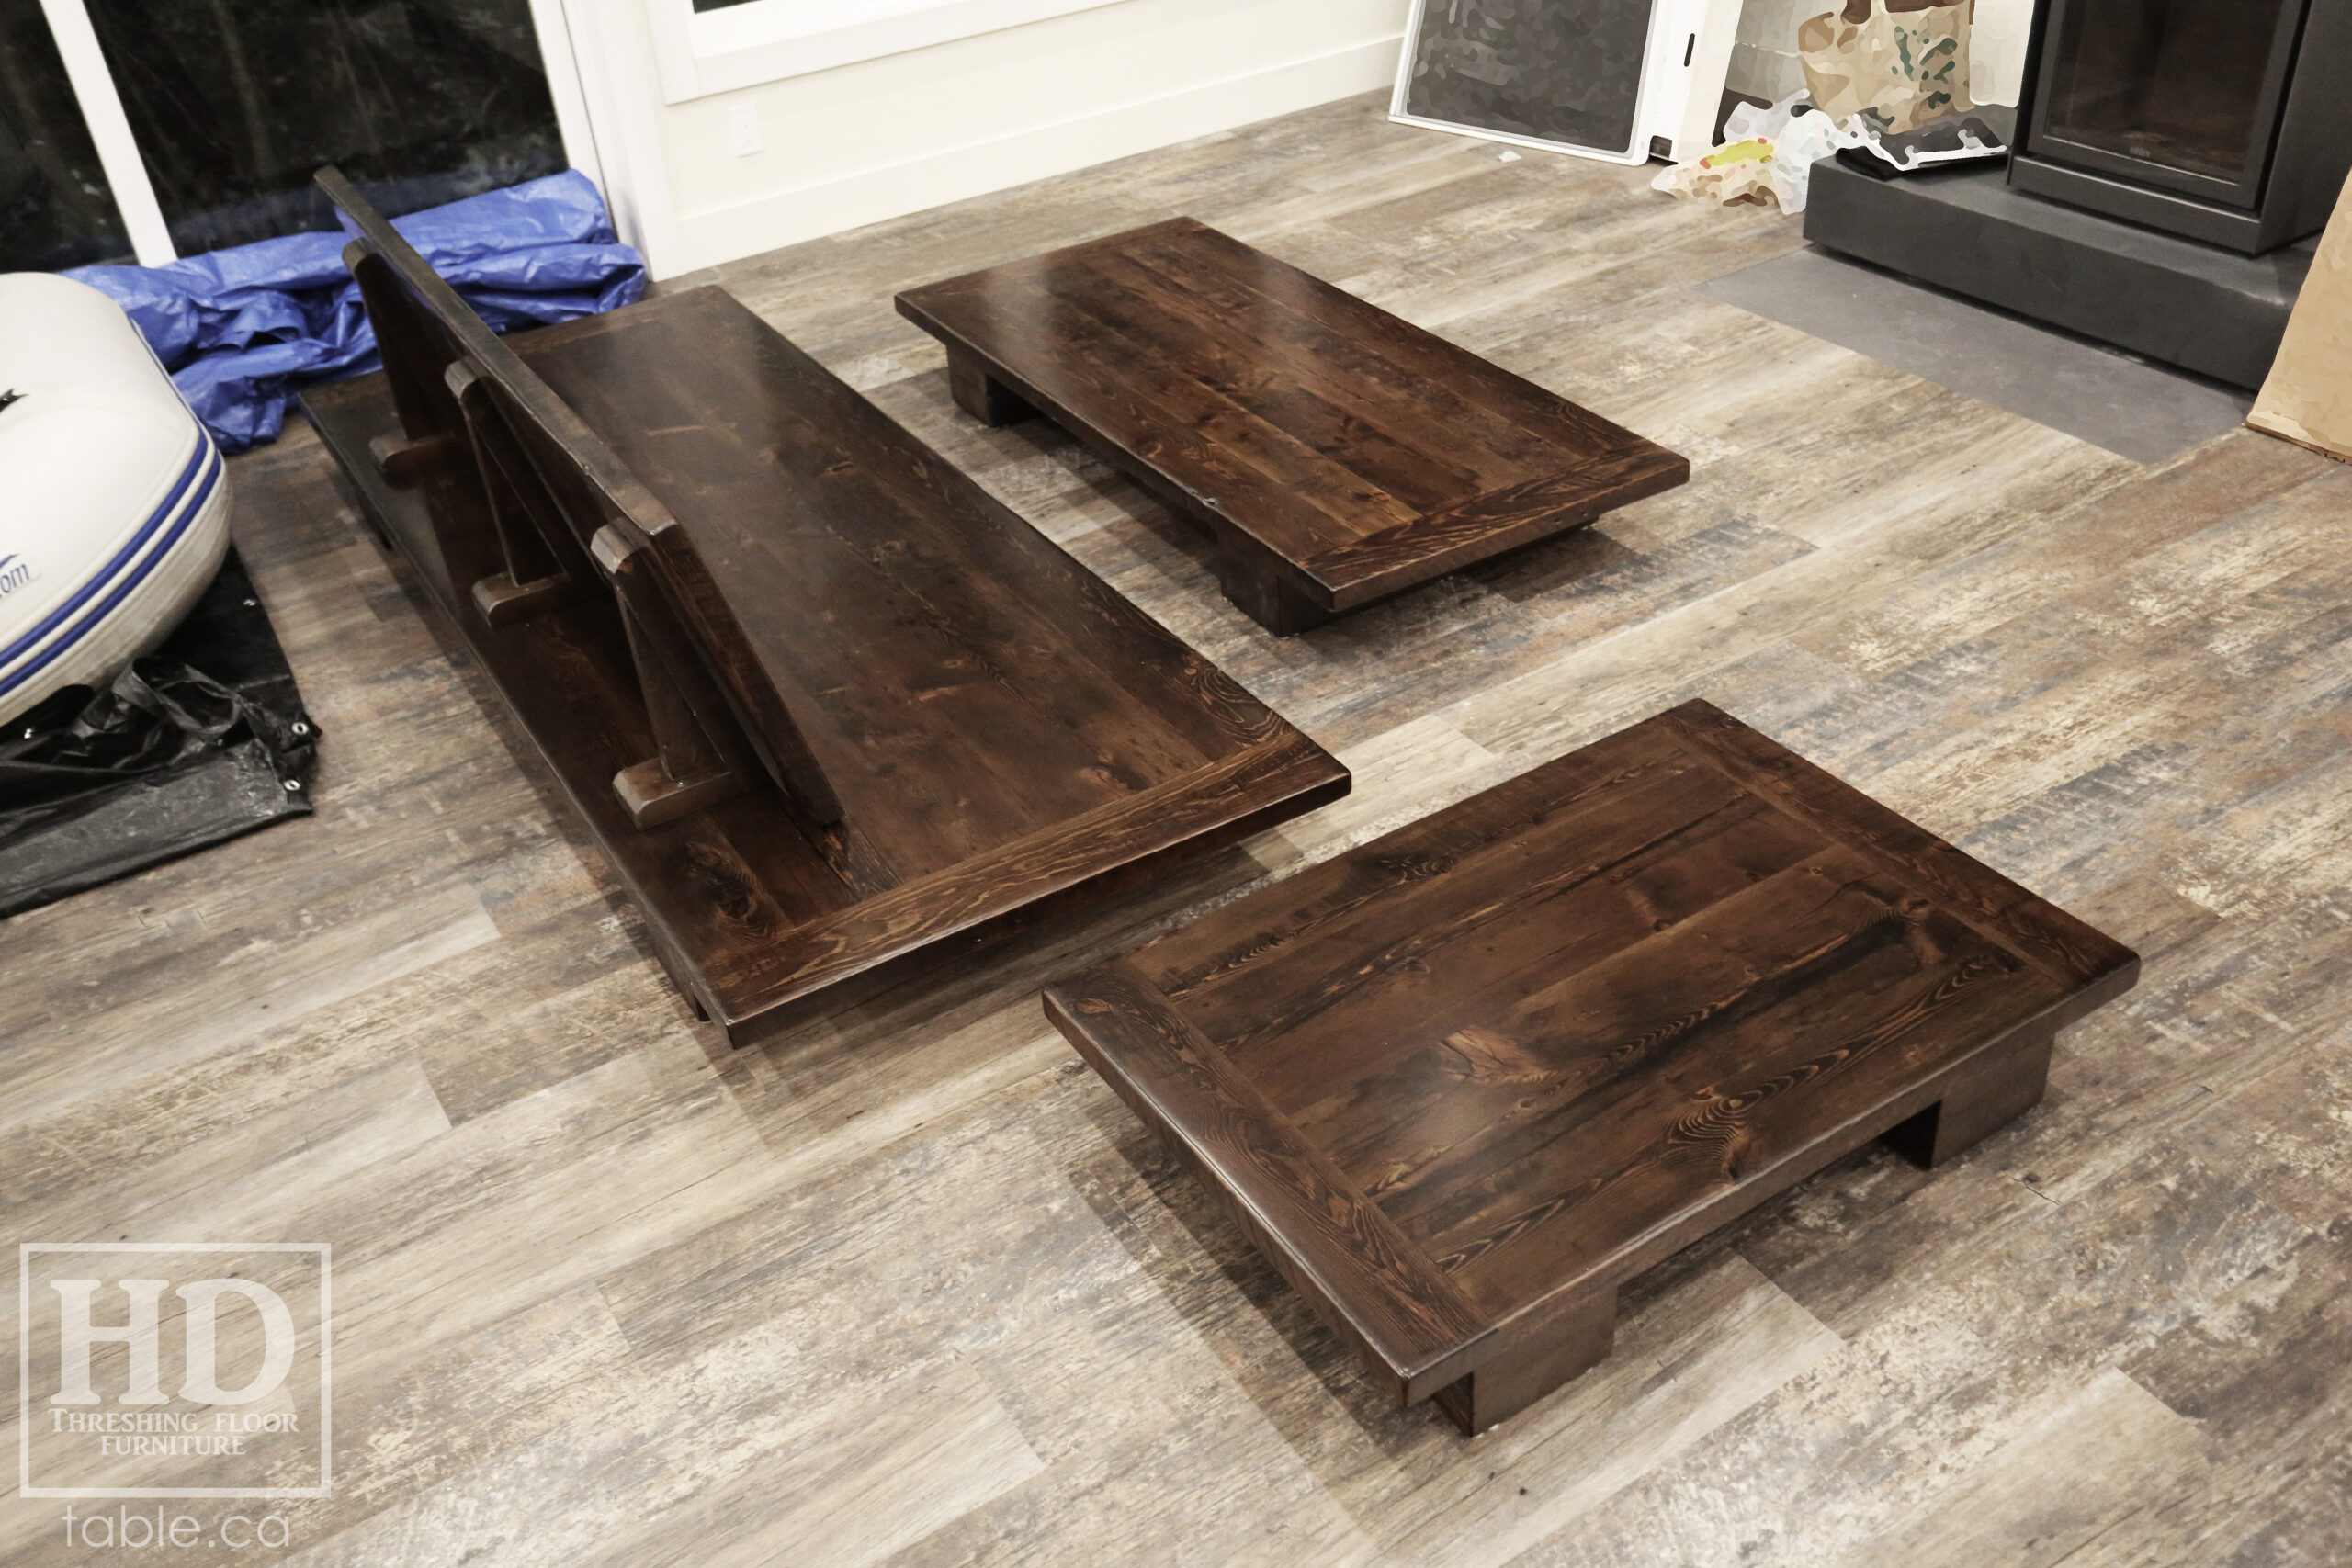 Ontario Barnwood Platform Style Coffee Tables we made for a Parry Sound home - 42"  x29" & 5'6" x 29" - 8" height  - Reclaimed Old Growth Hemlock Threshing Floor Construction - Original edges & distressing maintained - Black Stain Option - Premium epoxy + satin polyurethane finish - www.table.ca